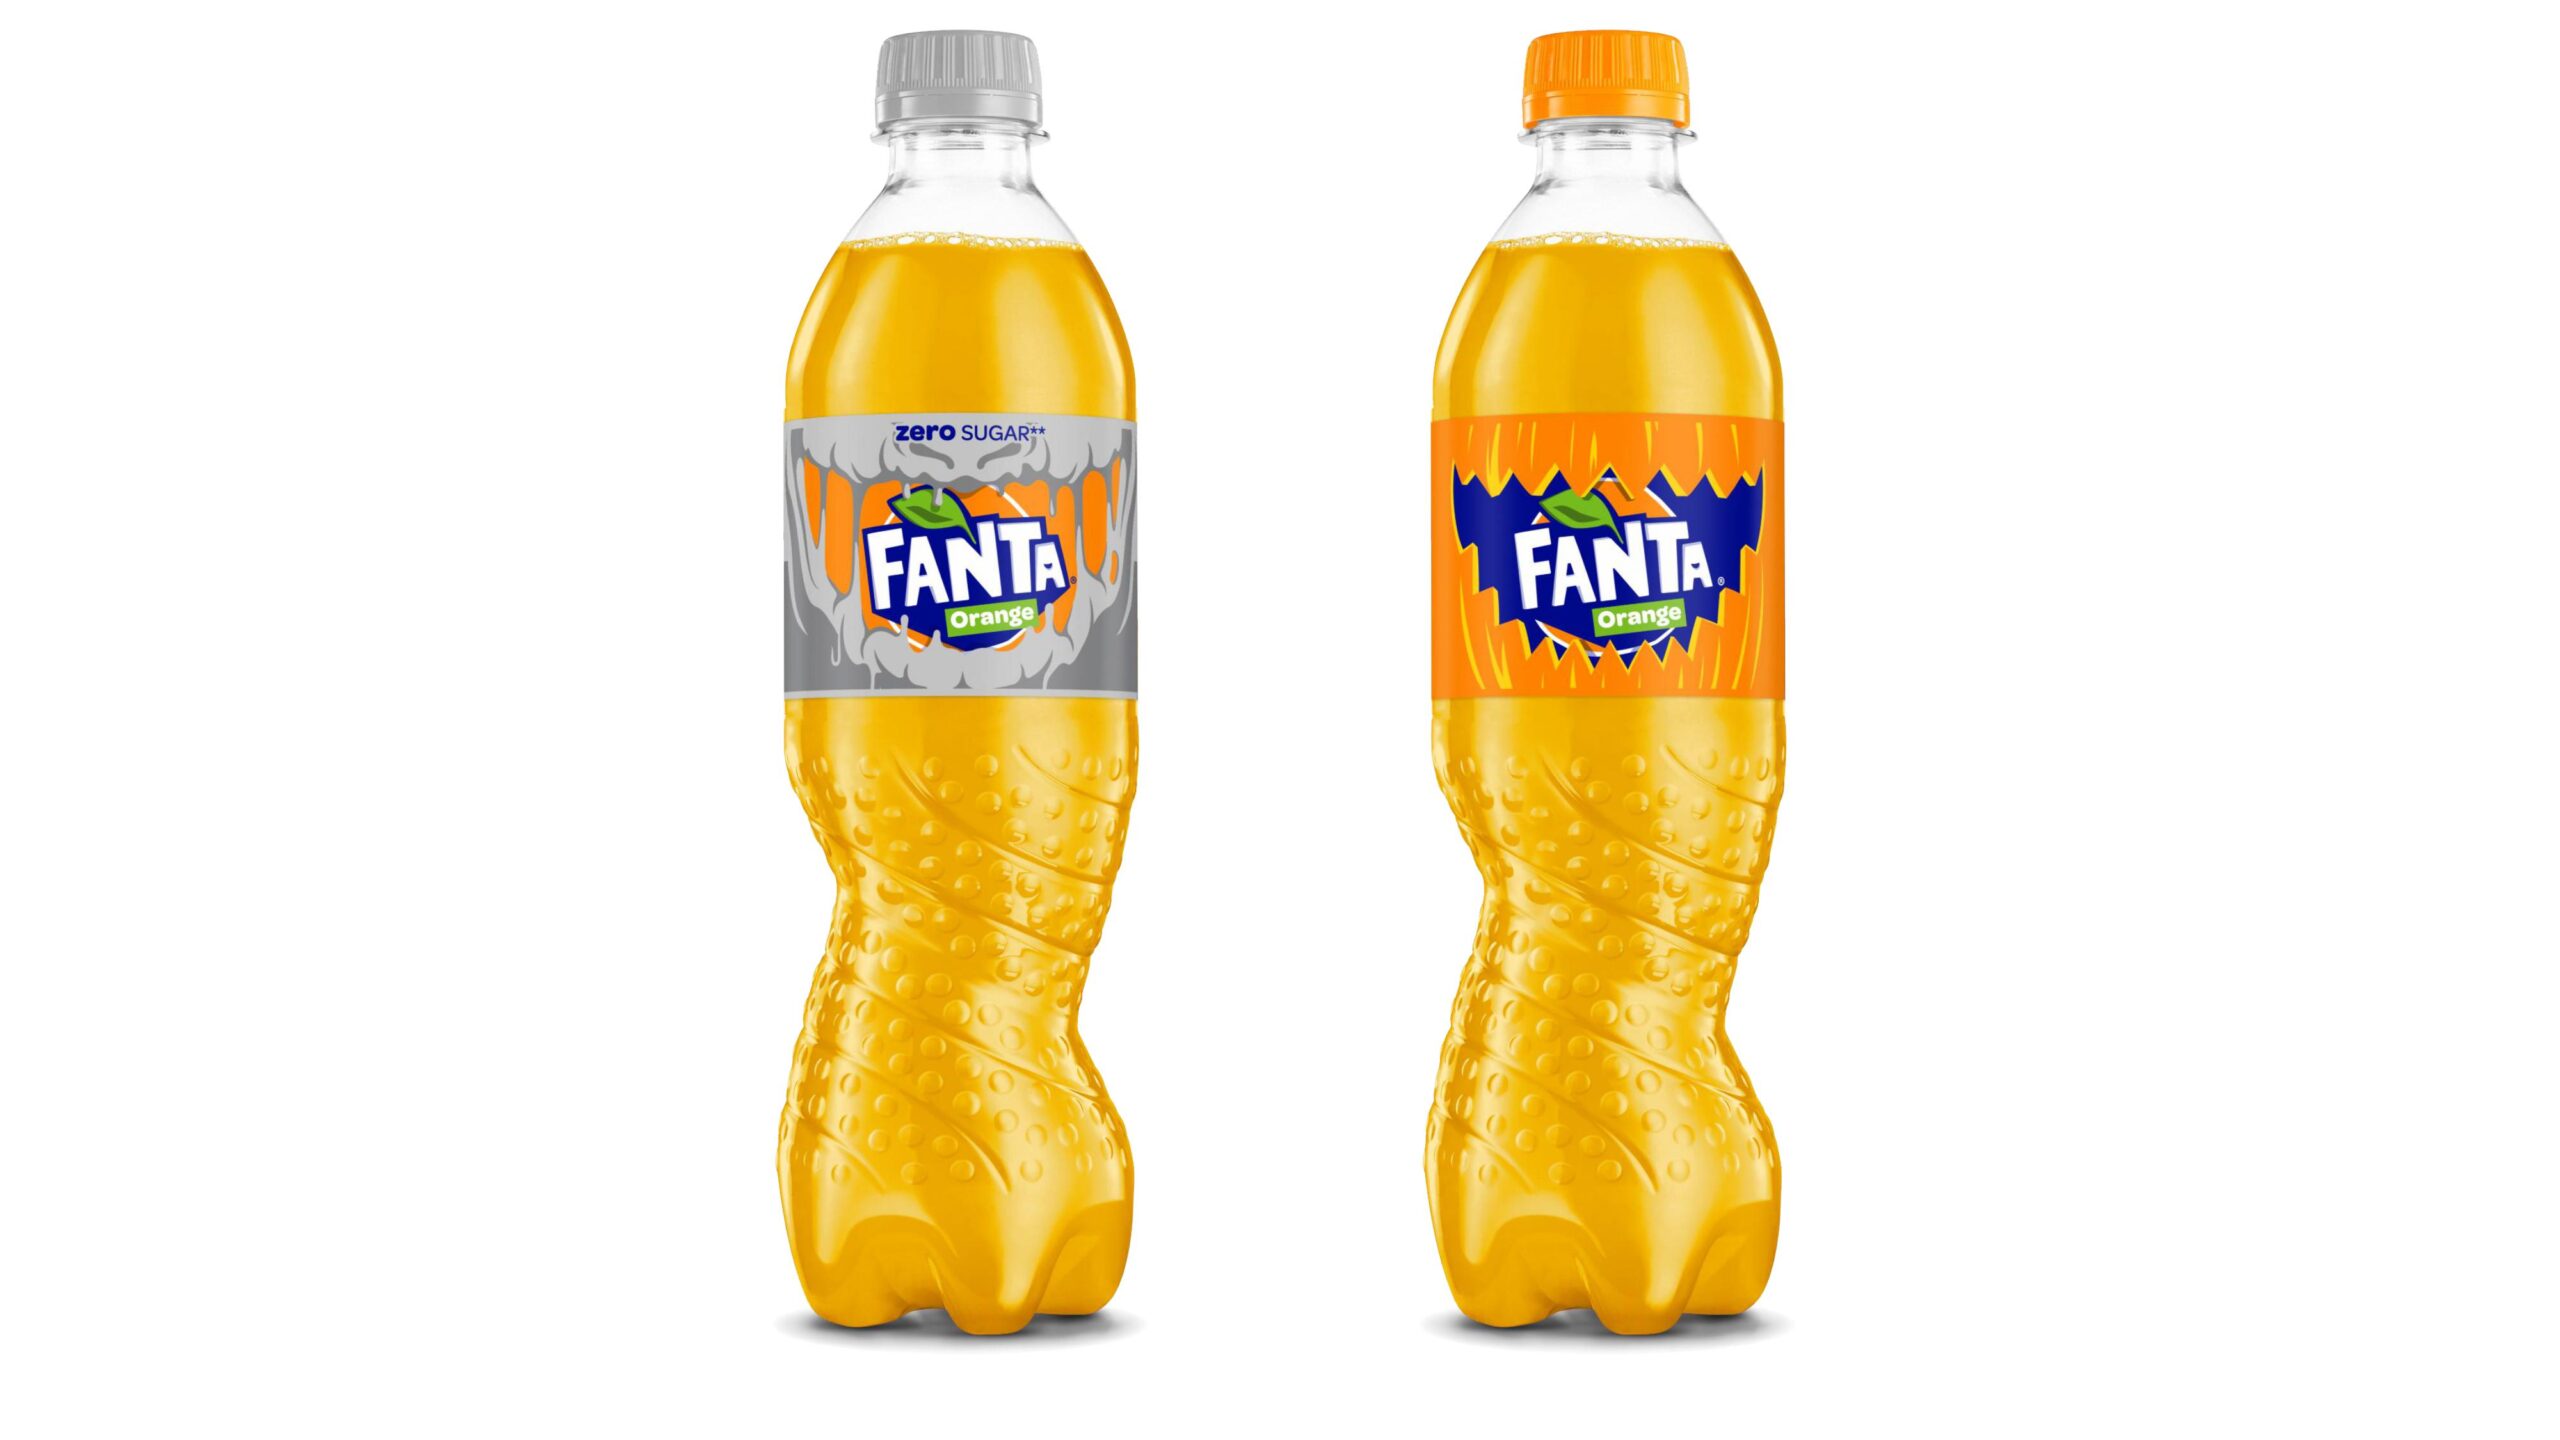 Fanta returns with limitededition Halloween packs and promotion